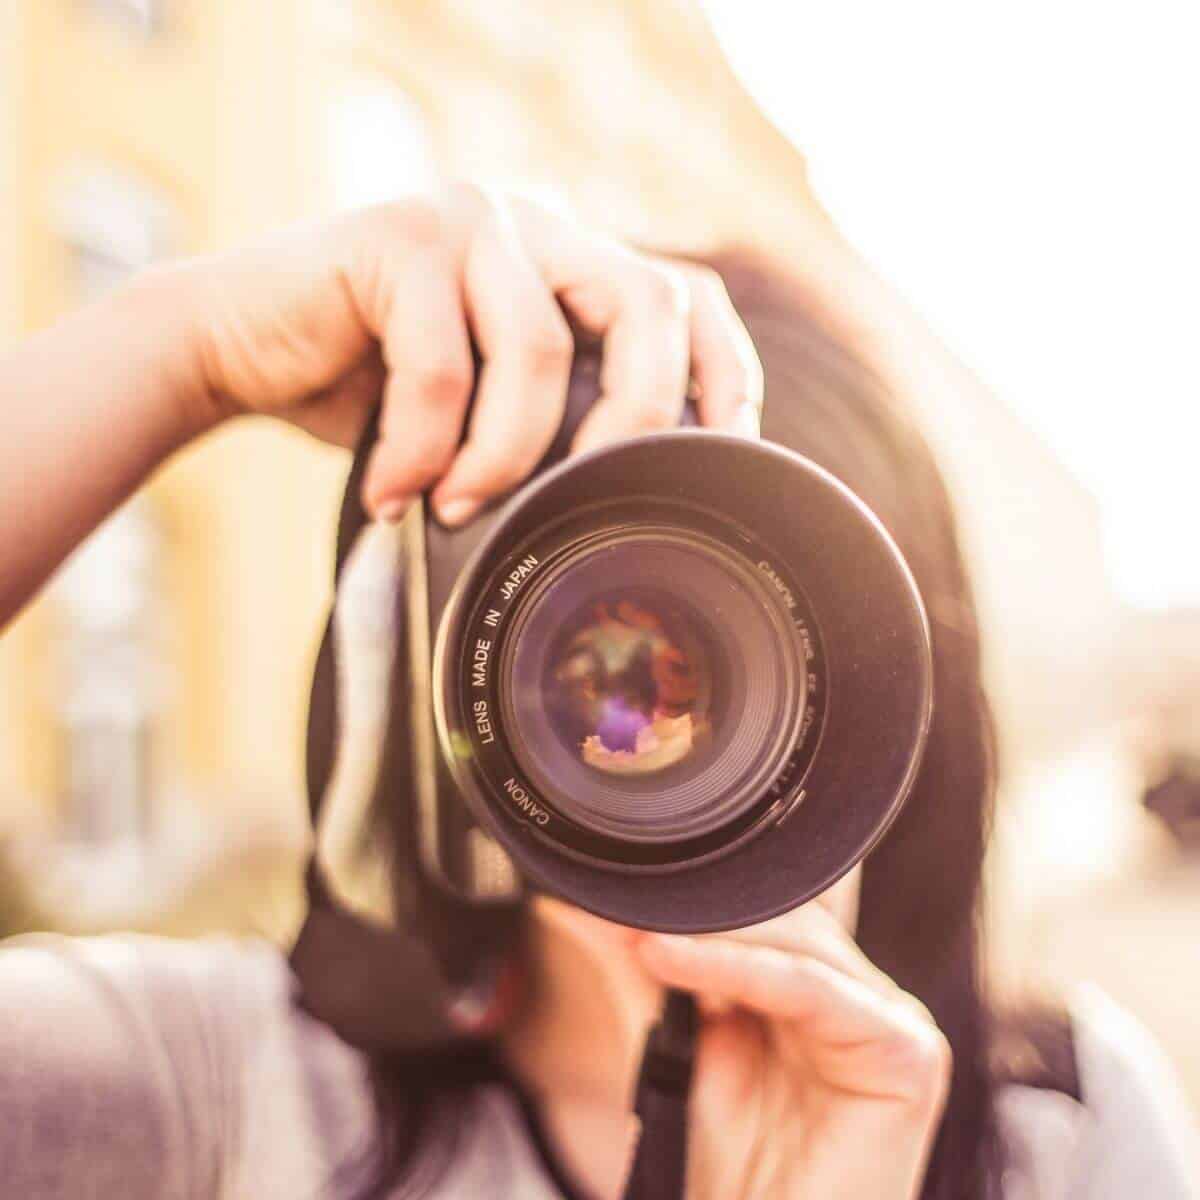 Selective focus on a camera lens while a person is taking a photo in the city.